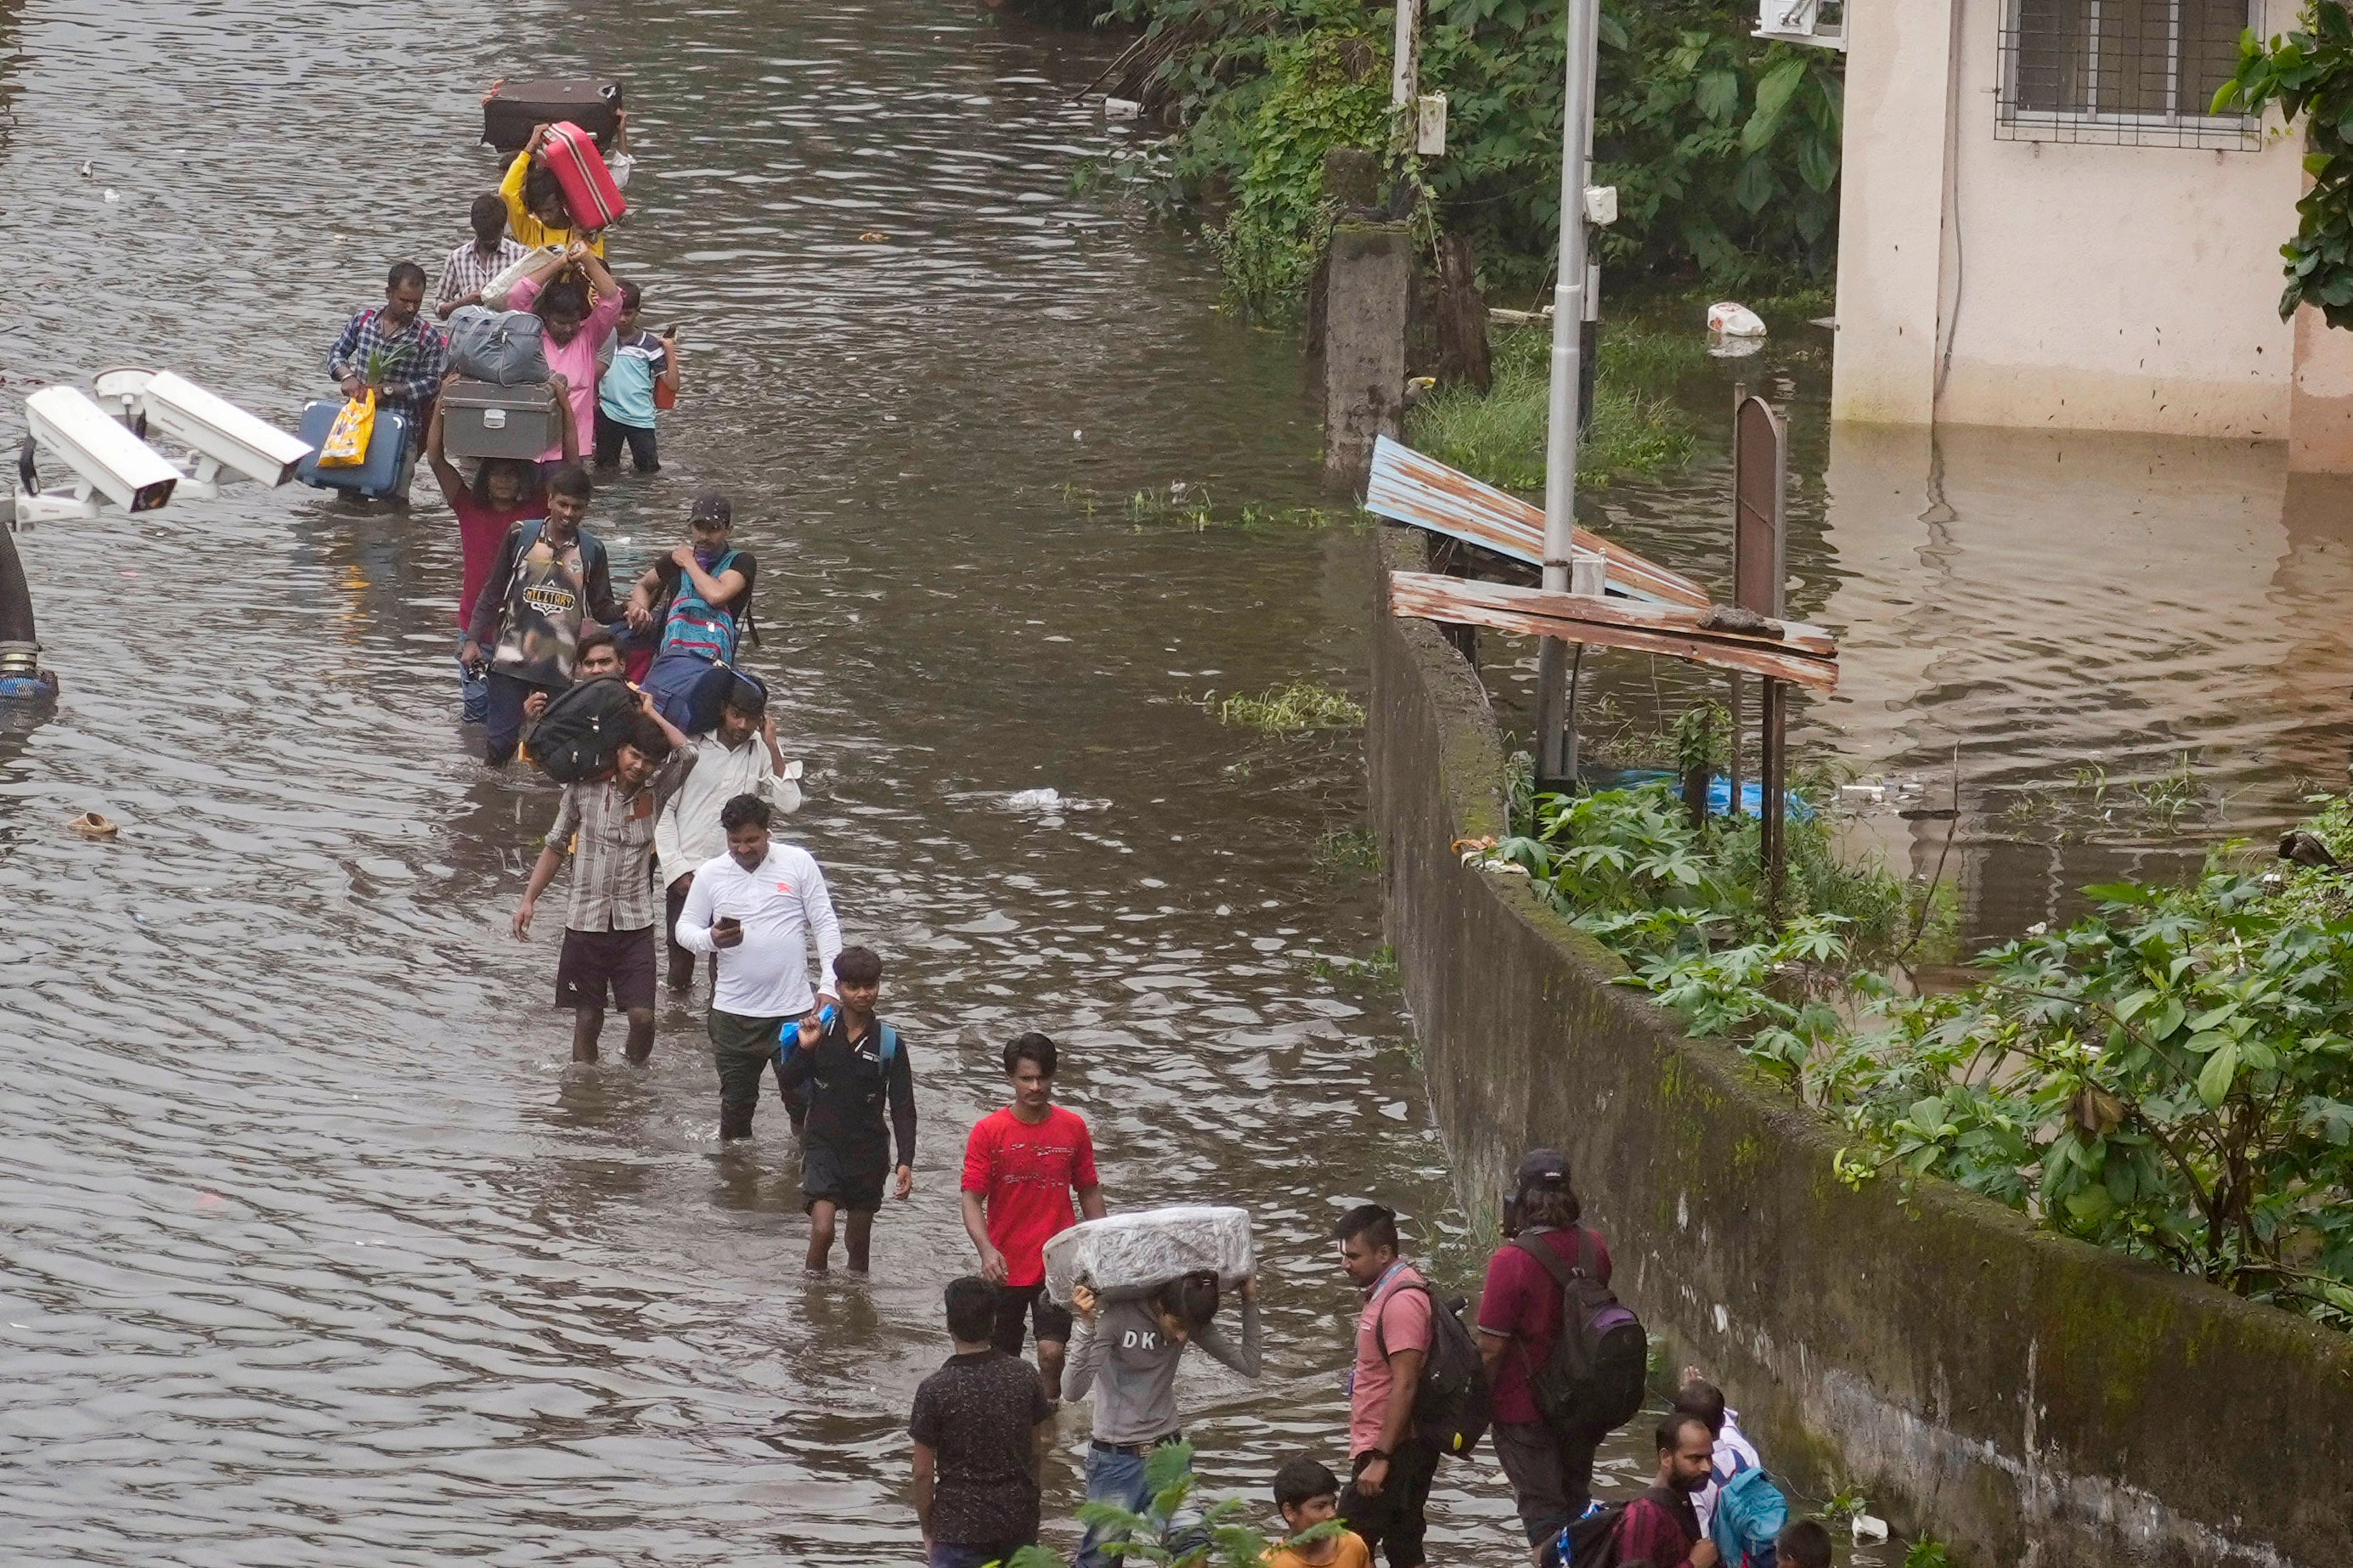 Commuters navigate a submerged street after heavy rainfall in Mumbai, India